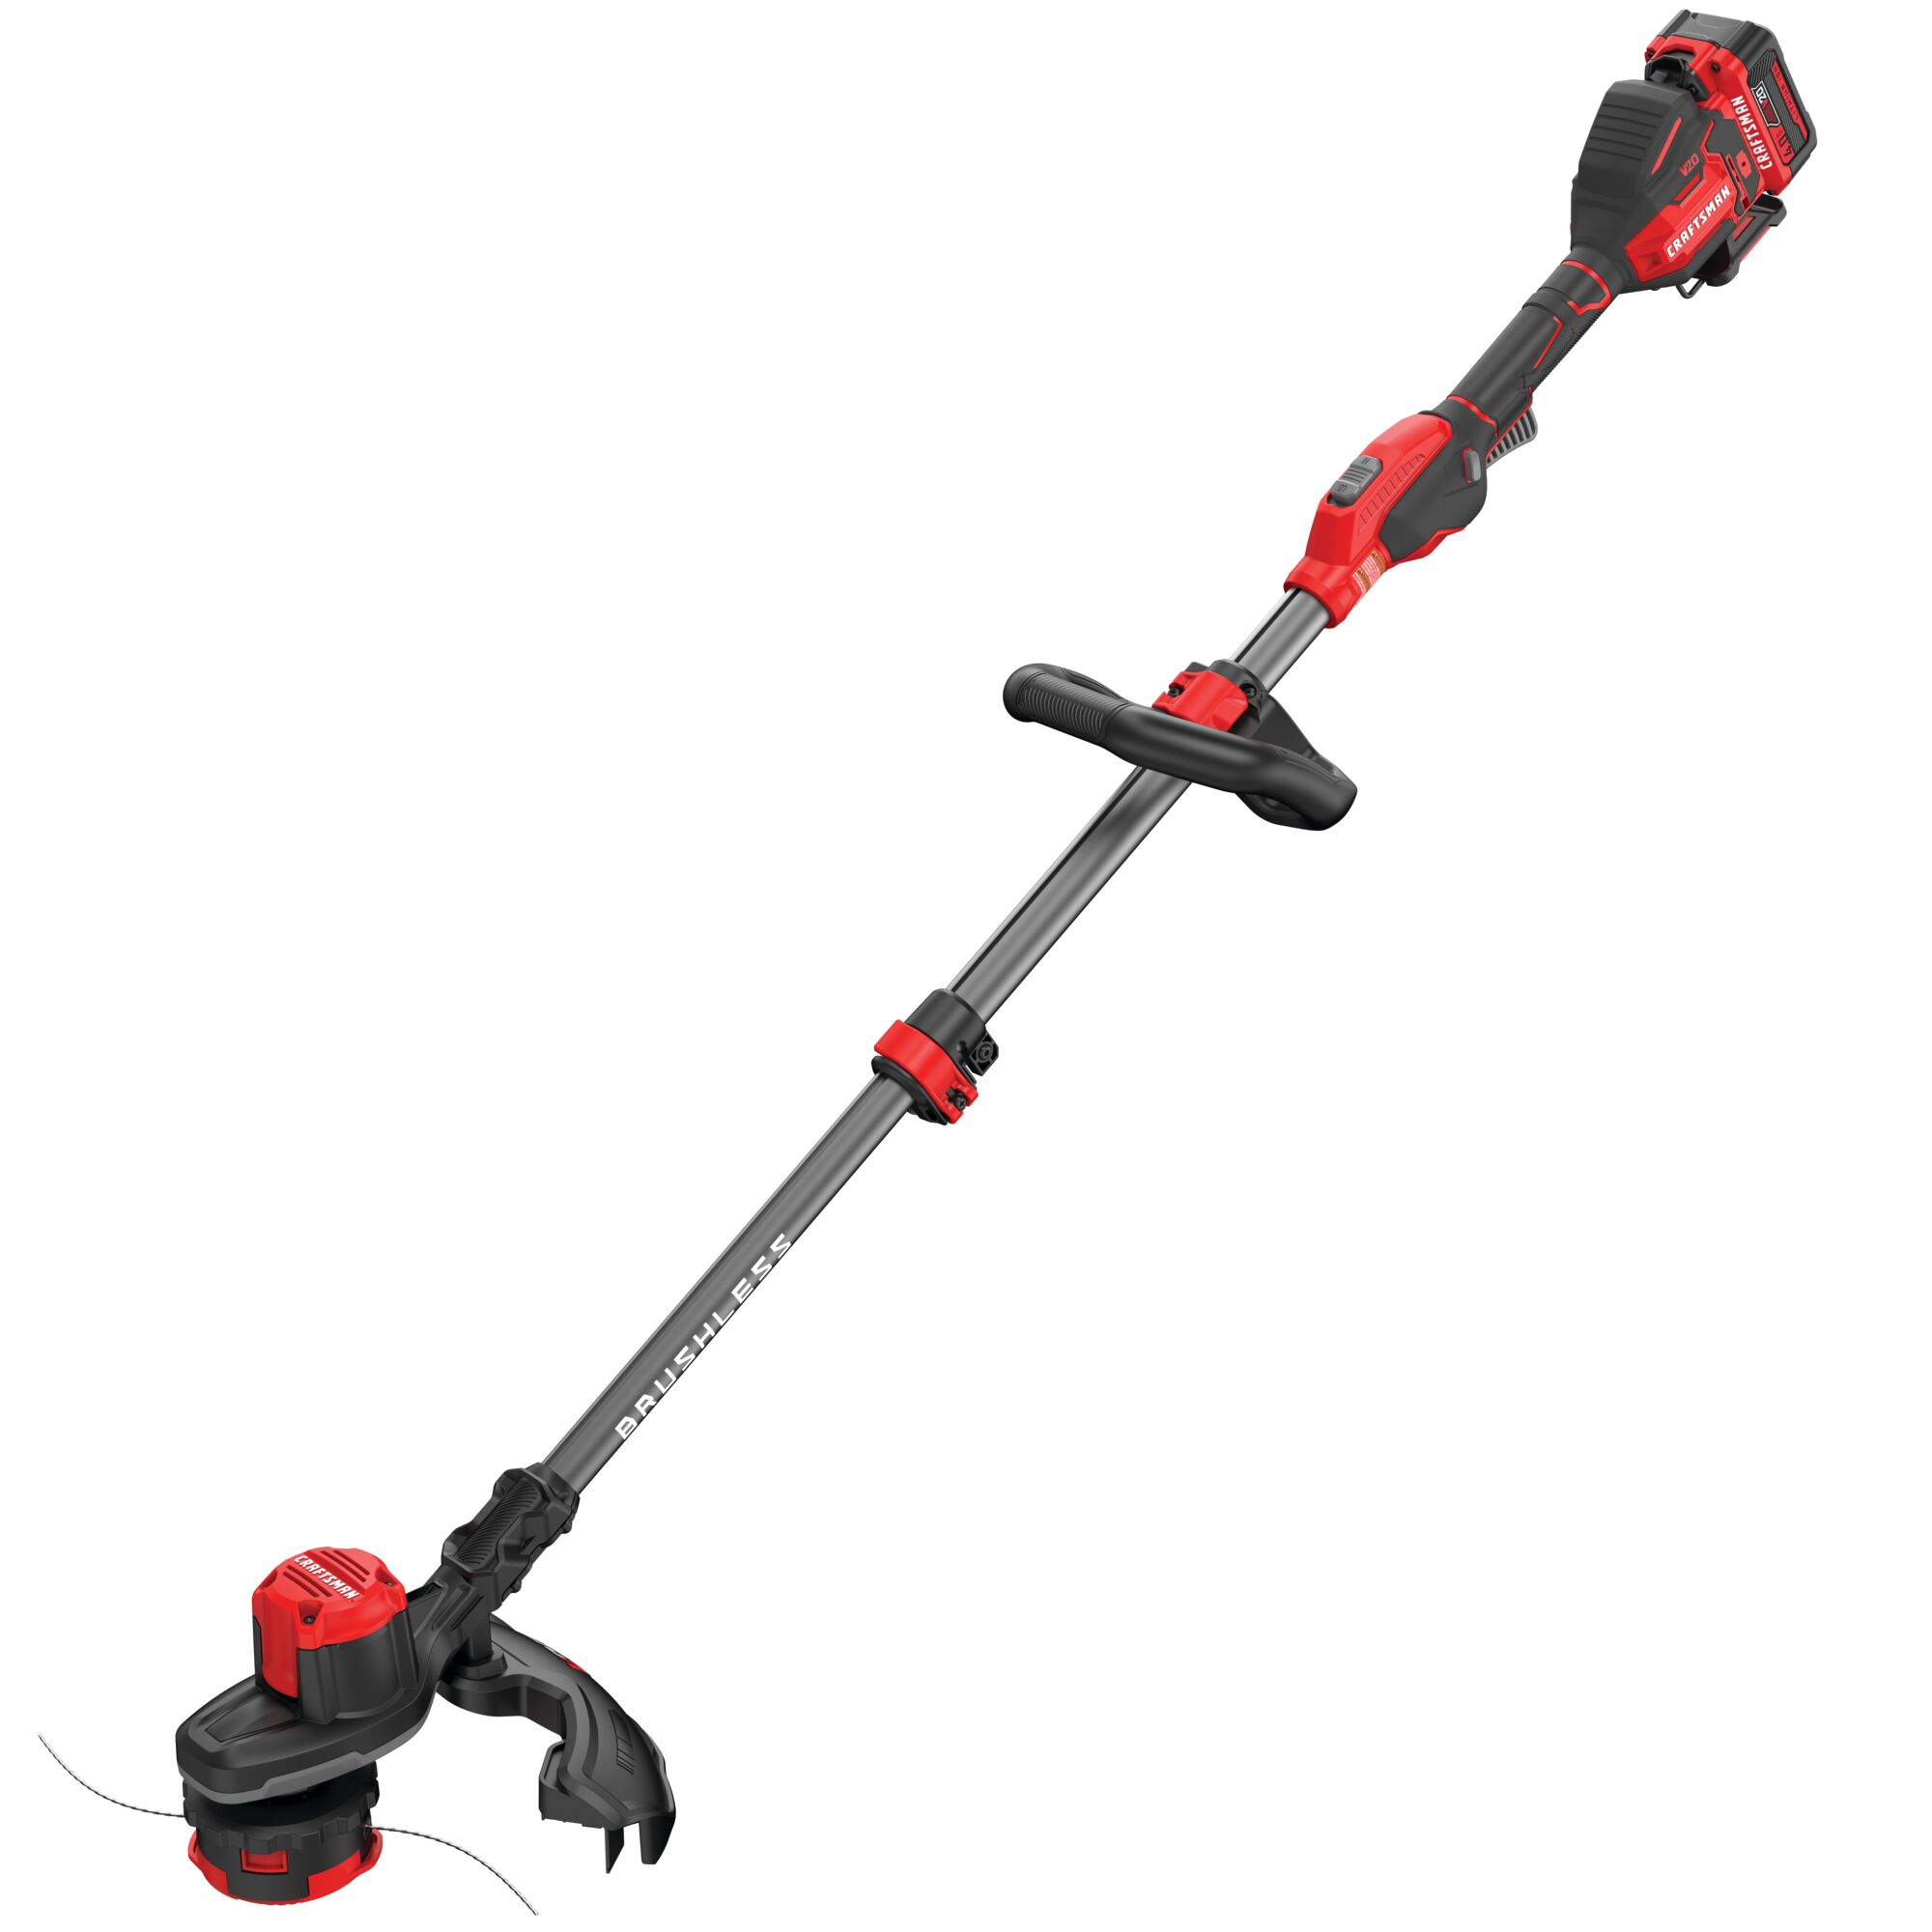 Left profile of 20 volt weedwacker 13 inch brushless cordless string trimmer with quickwind 4.0 ampere per hour.